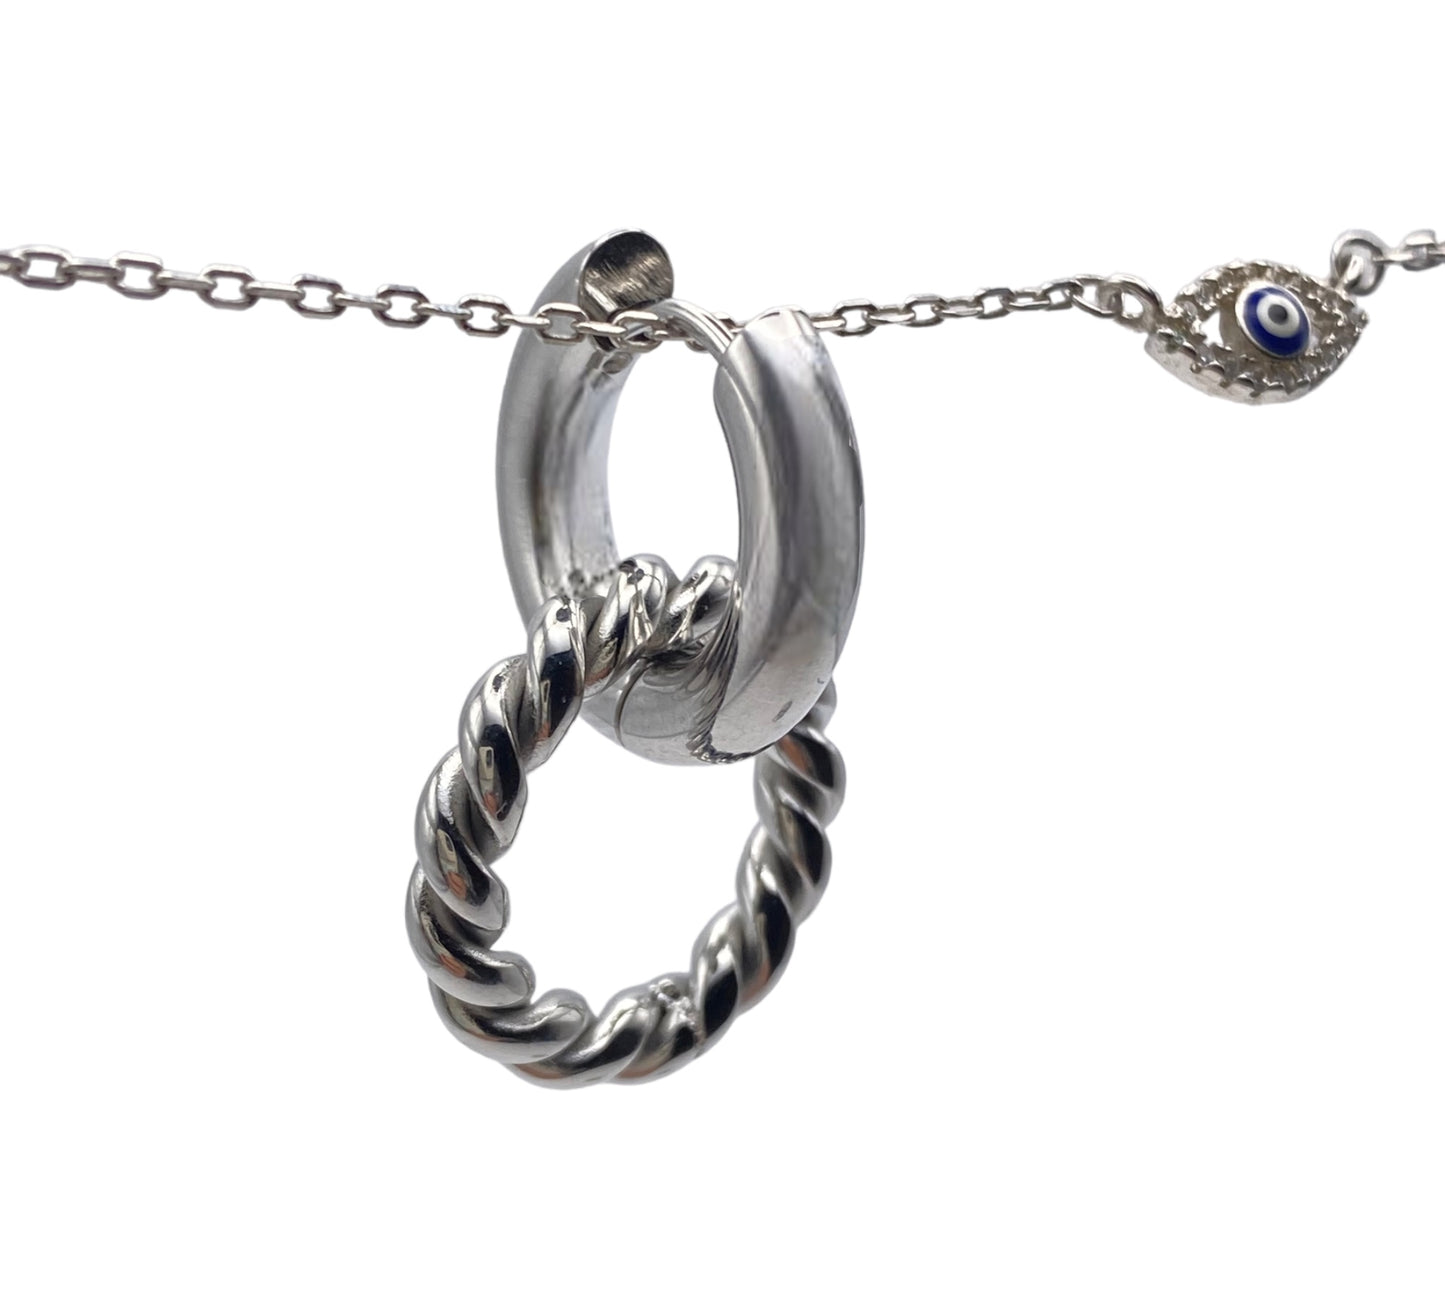 "WHISPER" silver colored hoops with a dangling round charm